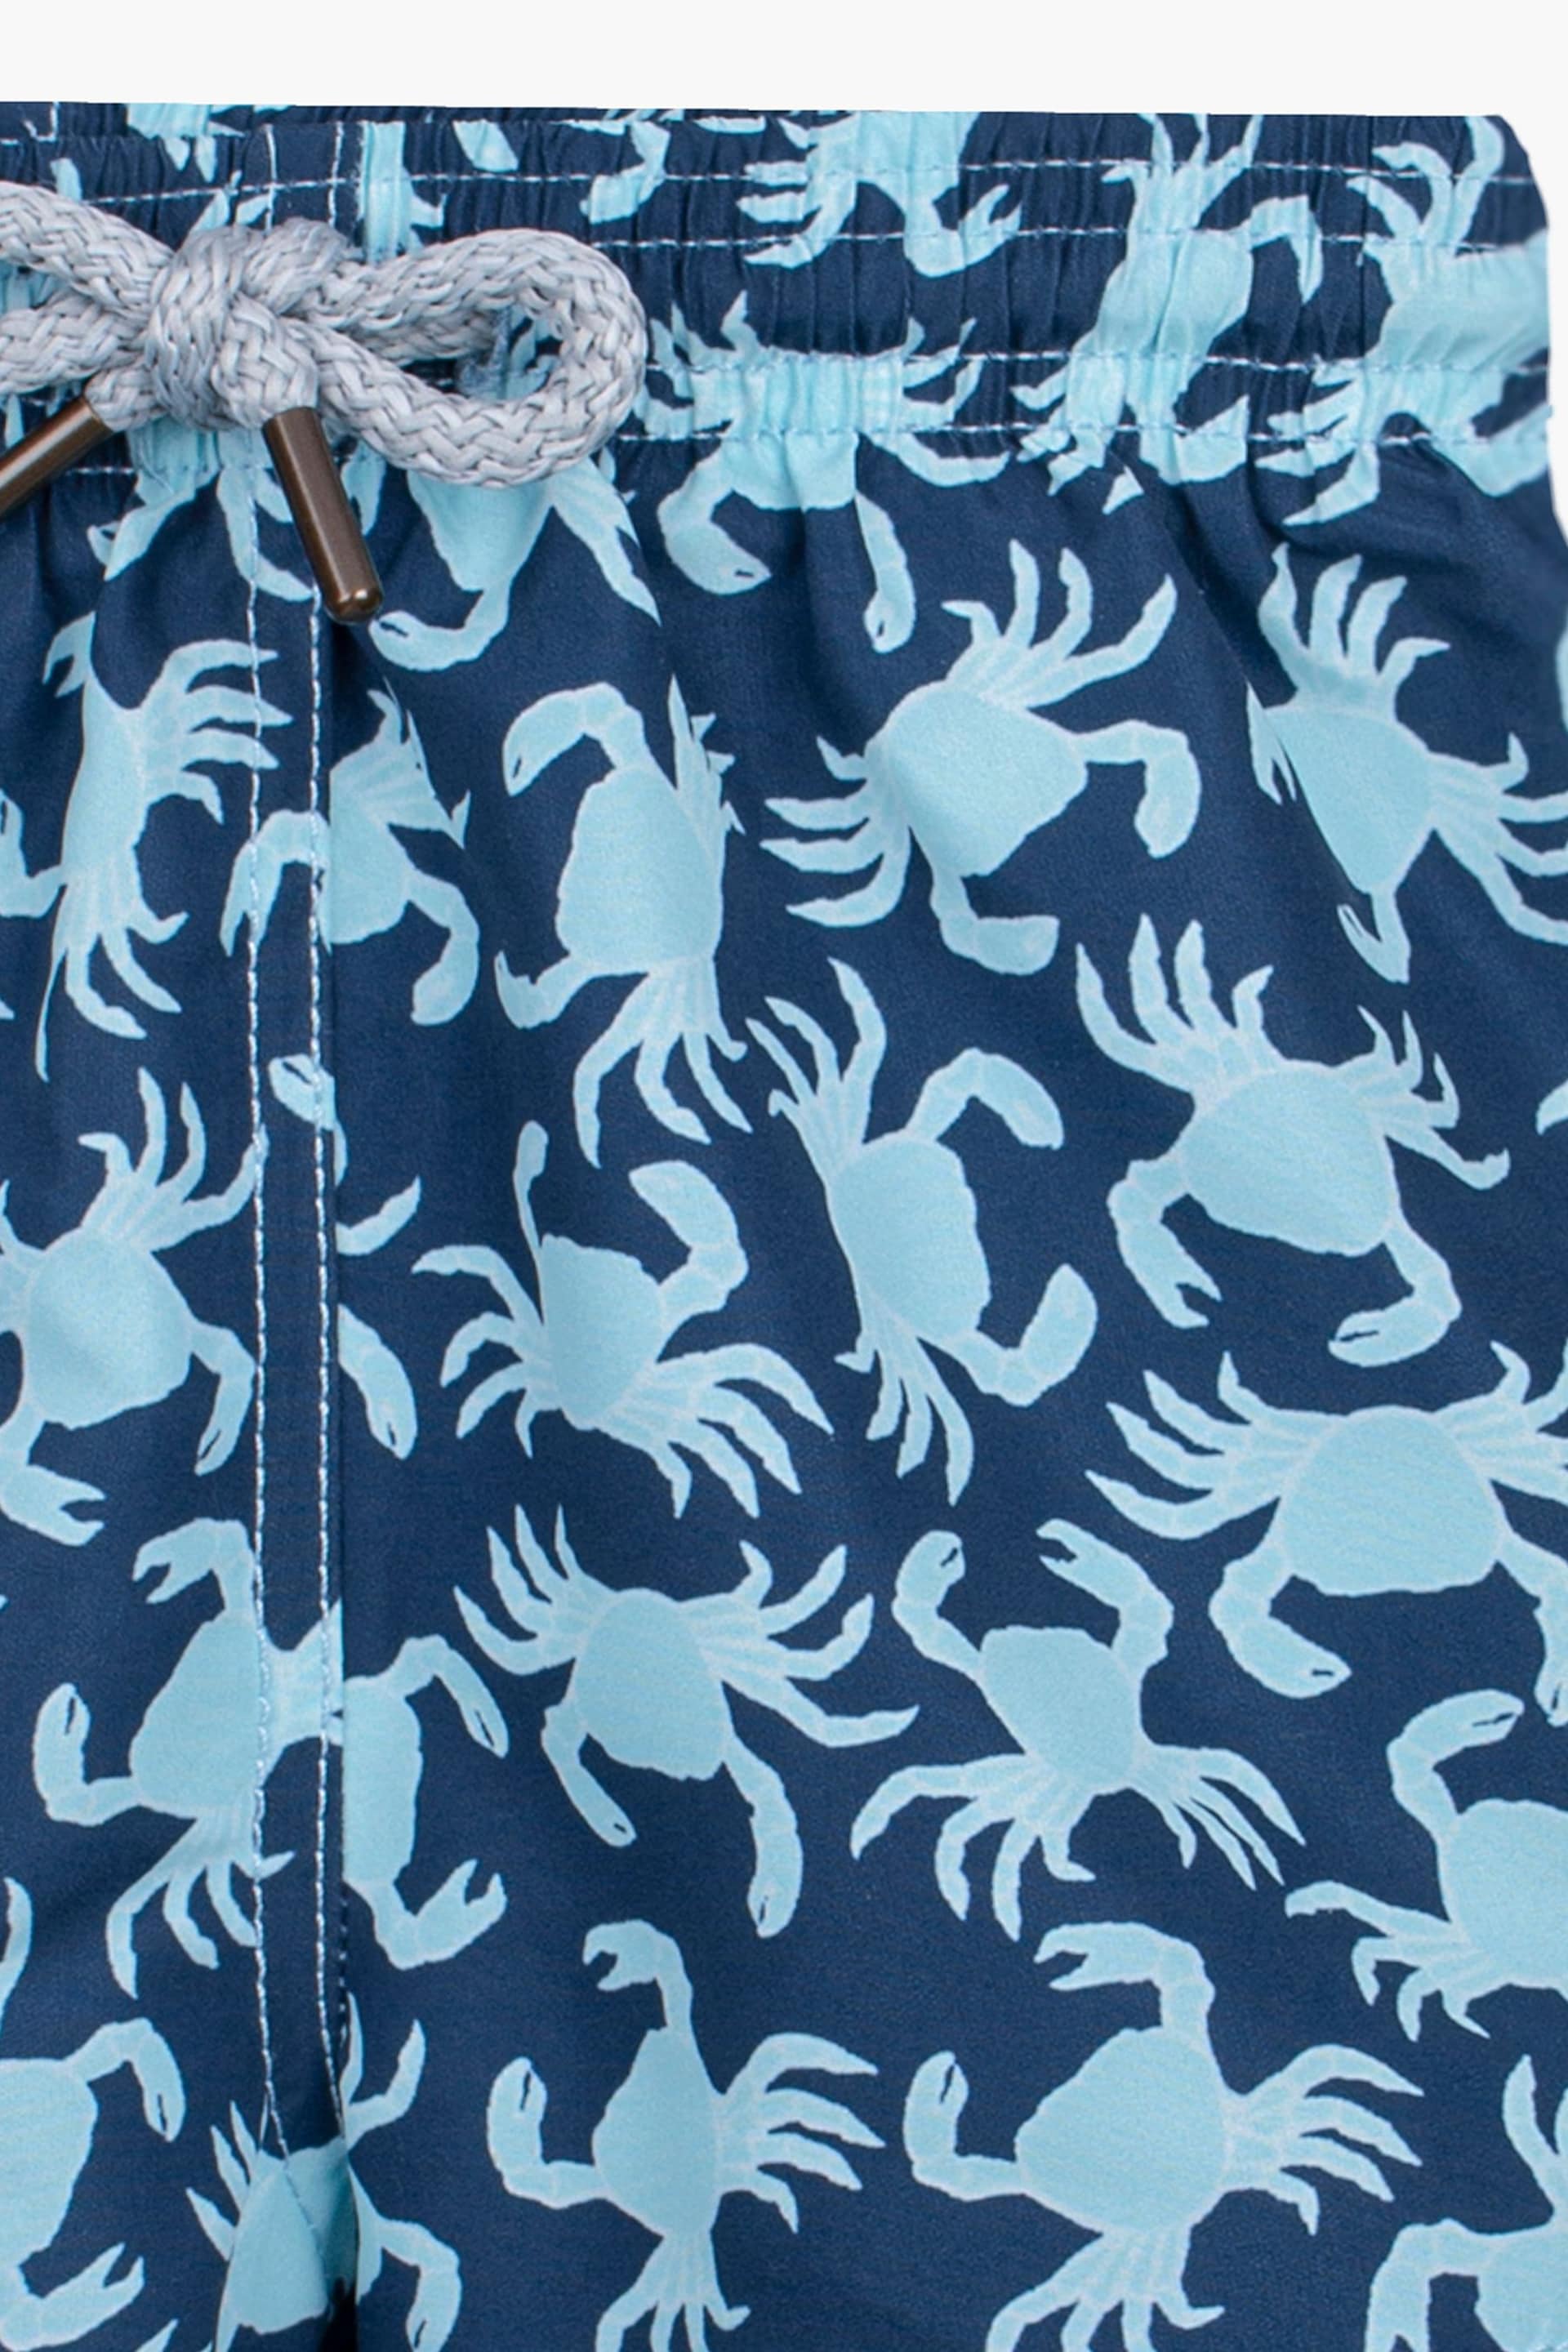 Trotters London Blue Little Crab Swimshorts - Image 3 of 3